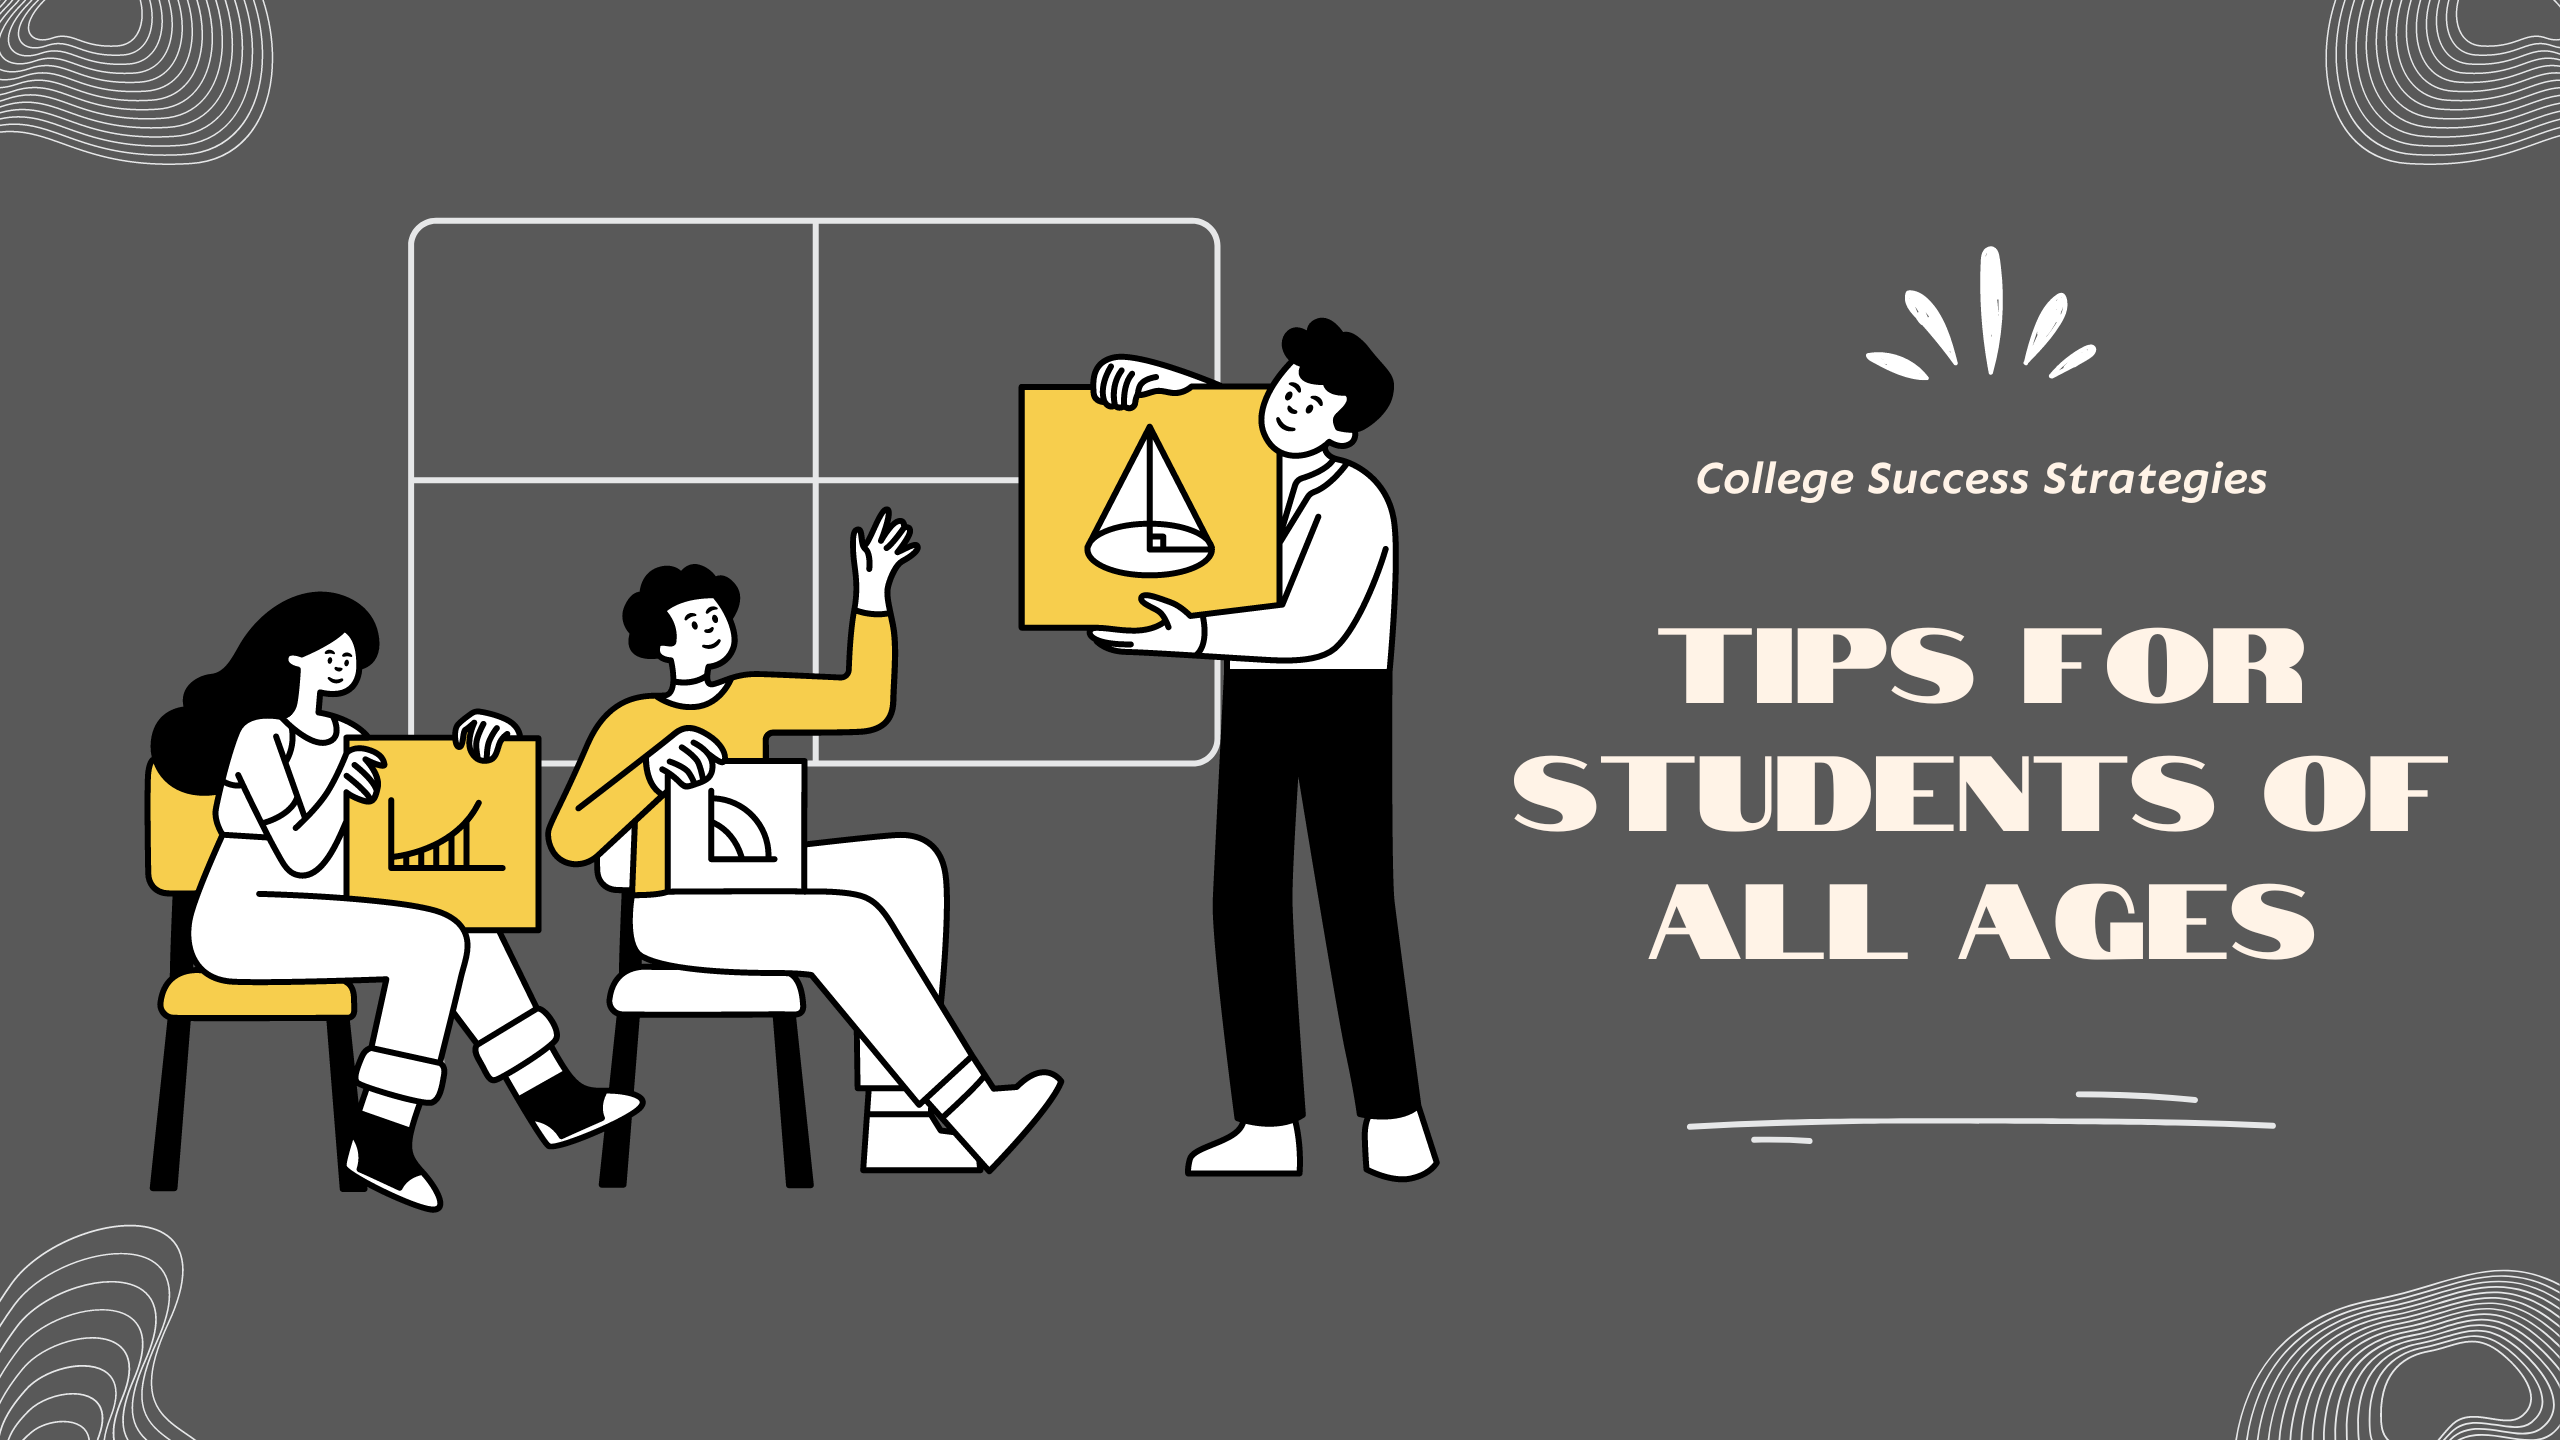 College Success Strategies: Tips for Students of All Ages